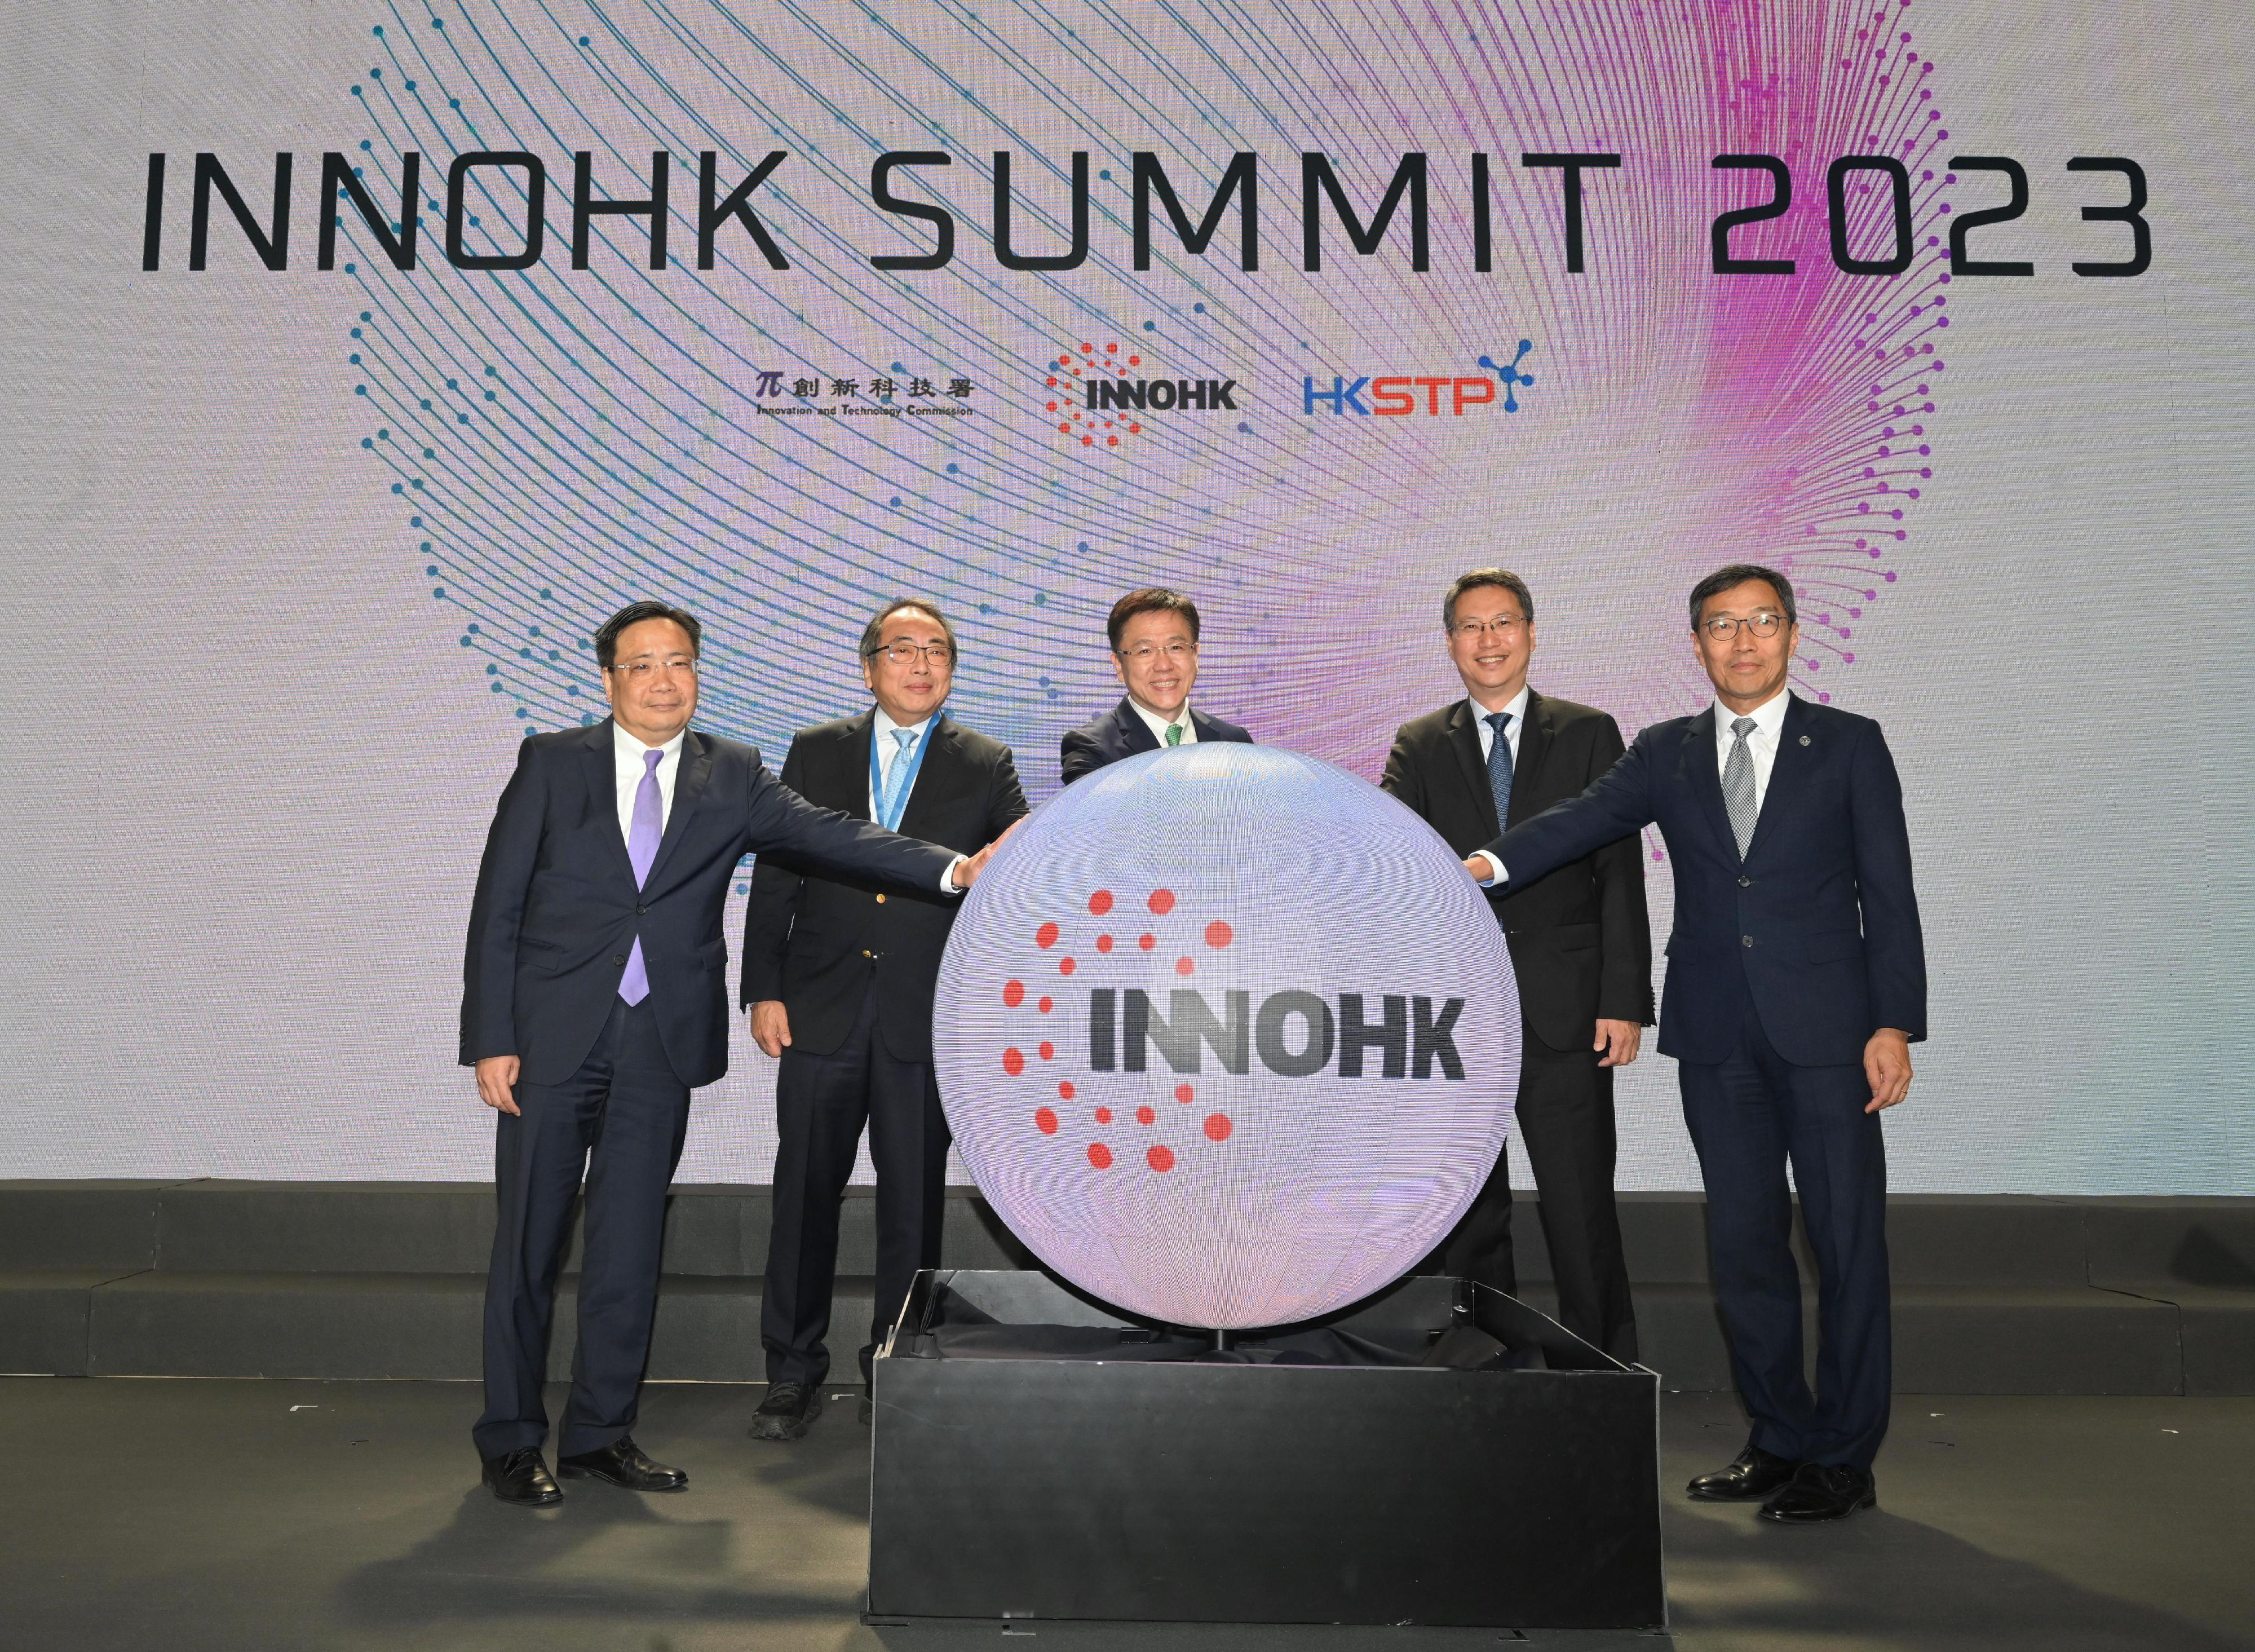 Organised by the Innovation and Technology Commission and the Hong Kong Science and Technology Parks Corporation (HKSTPC), the InnoHK Summit 2023 was held at Hong Kong Science Park today (December 6). Photo shows the Secretary for Innovation, Technology and Industry, Professor Sun Dong (centre); the Founding President of the Hong Kong Academy of Sciences and Chairman of the InnoHK Steering Committee, Professor Tsui Lap-chee (second left); the Permanent Secretary for Innovation, Technology and Industry, Mr Eddie Mak (second right); the Commissioner for Innovation and Technology, Mr Ivan Lee (first left); and the Chief Executive Officer of the HKSTPC, Mr Albert Wong (first right), officiating at the opening ceremony.
